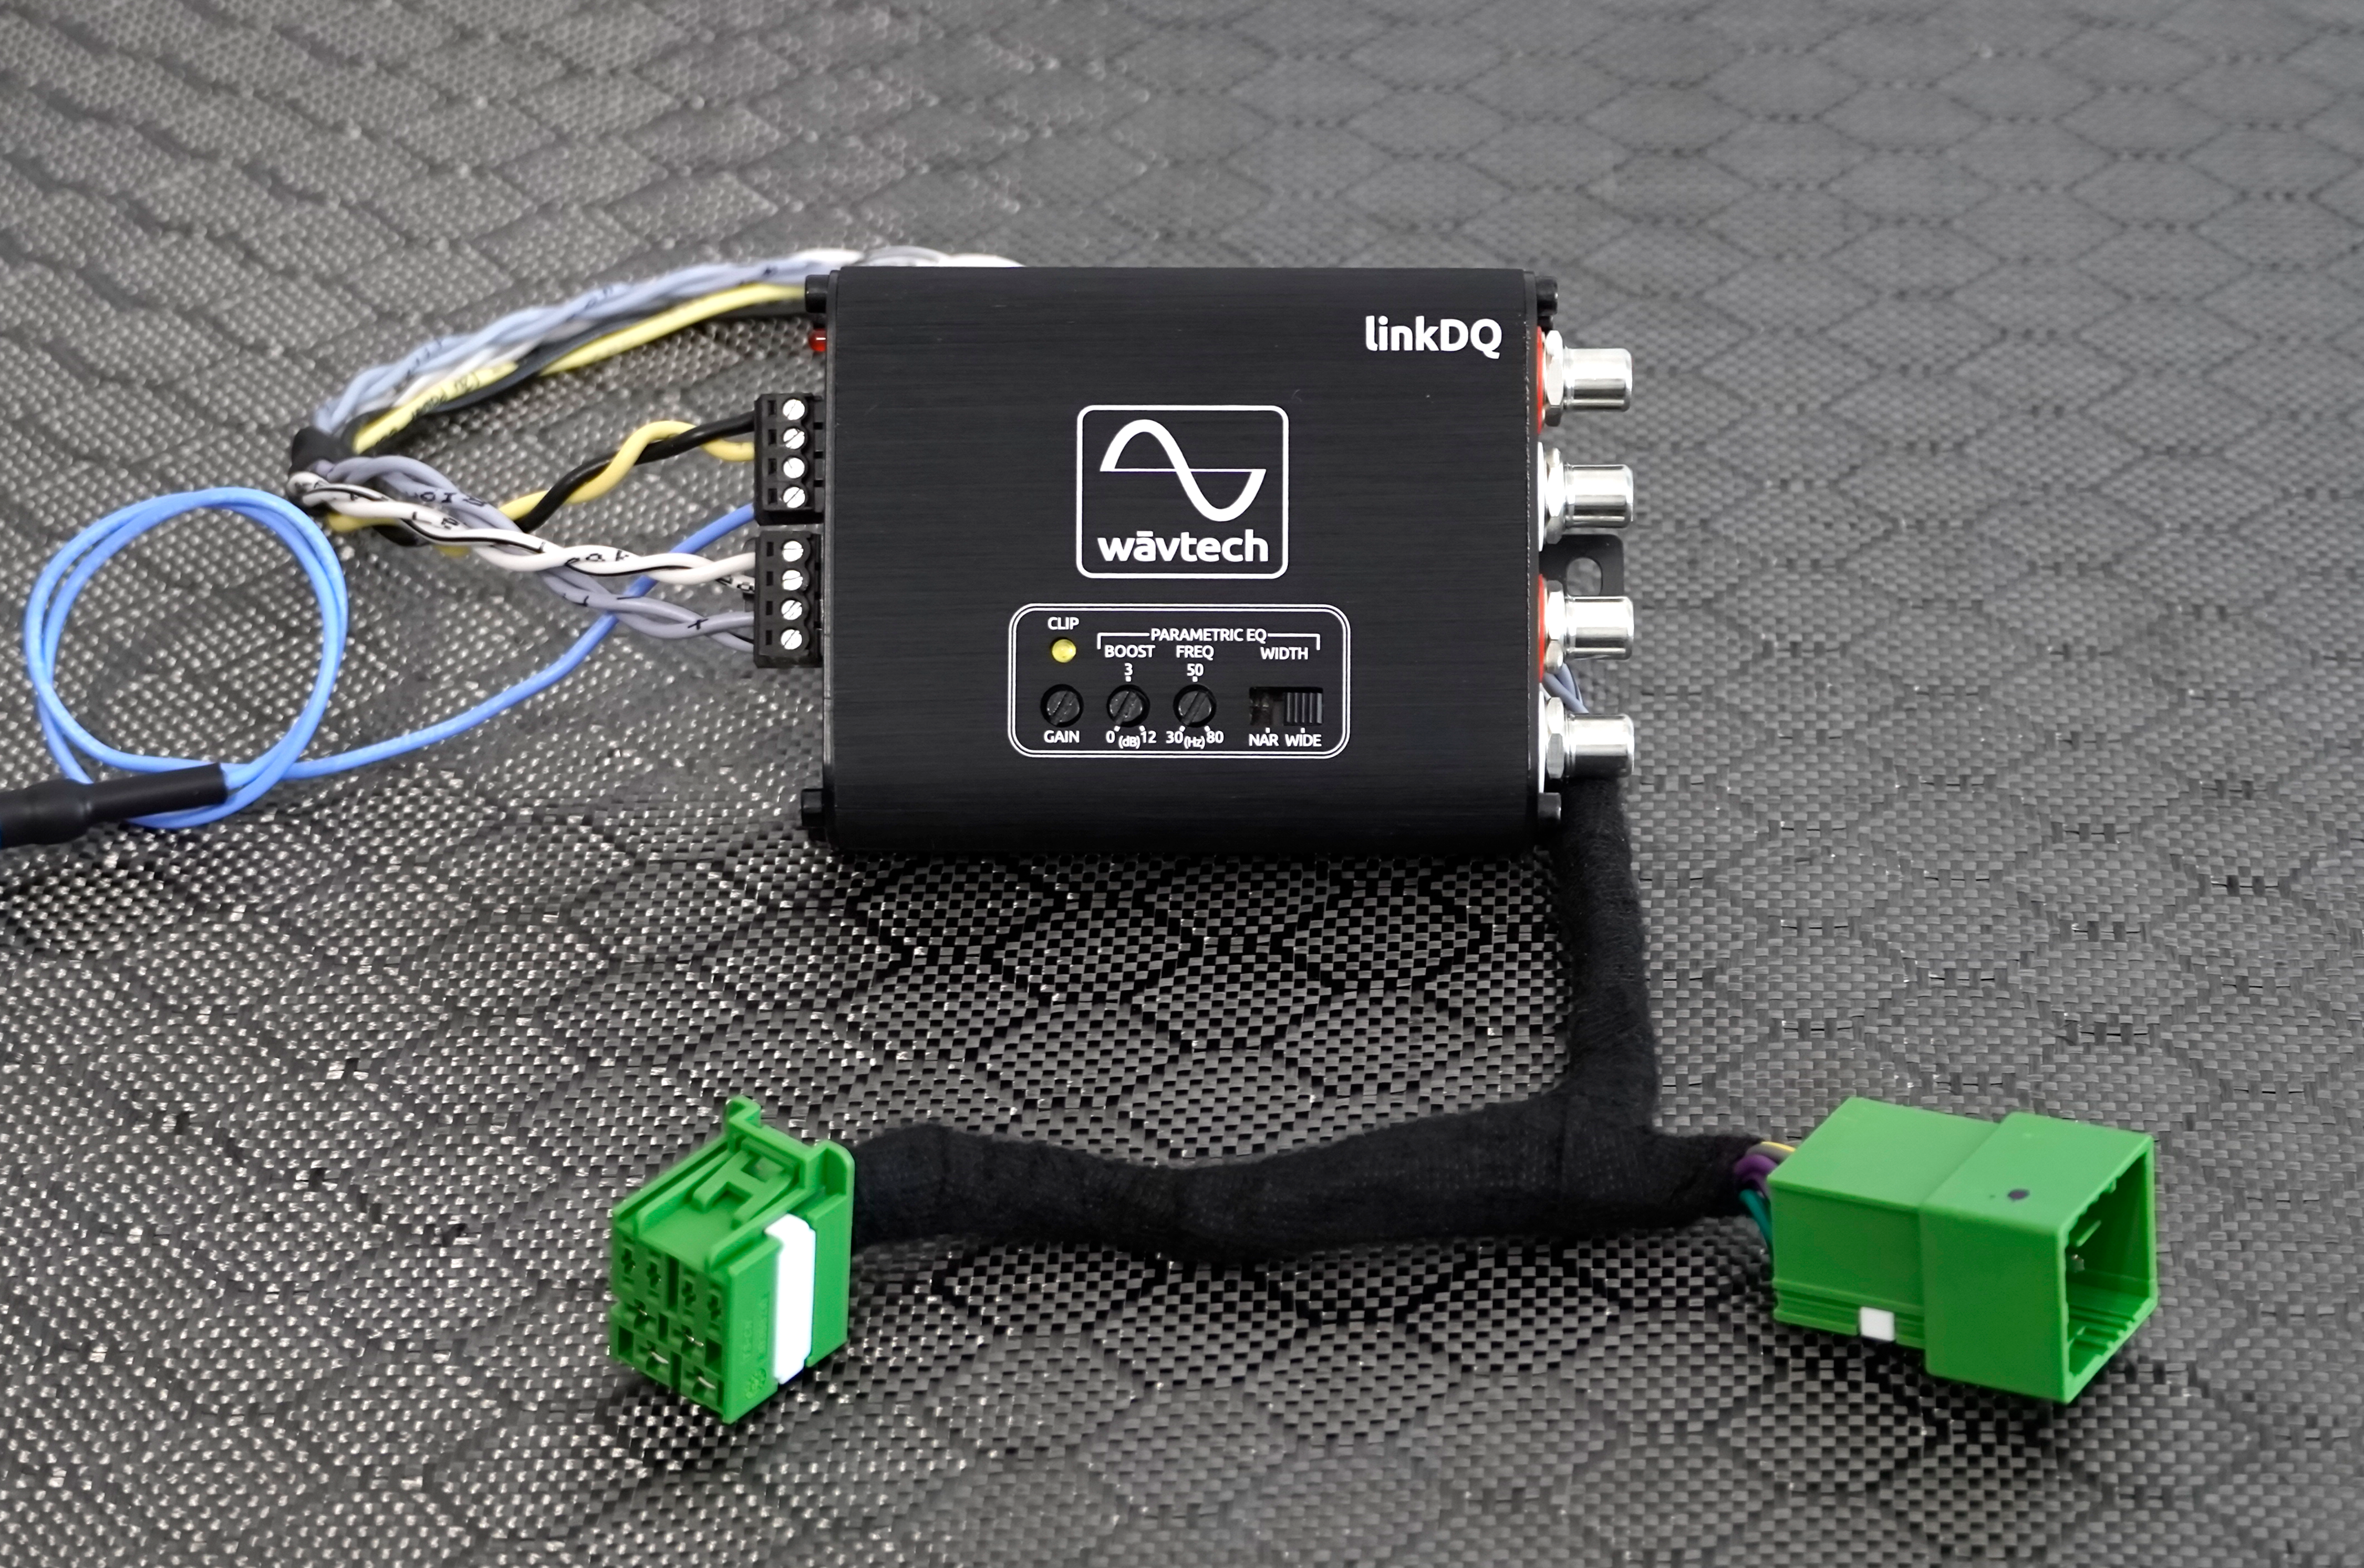 T-harness.com Wavtech linkDQ with Uconnect5 T-harness